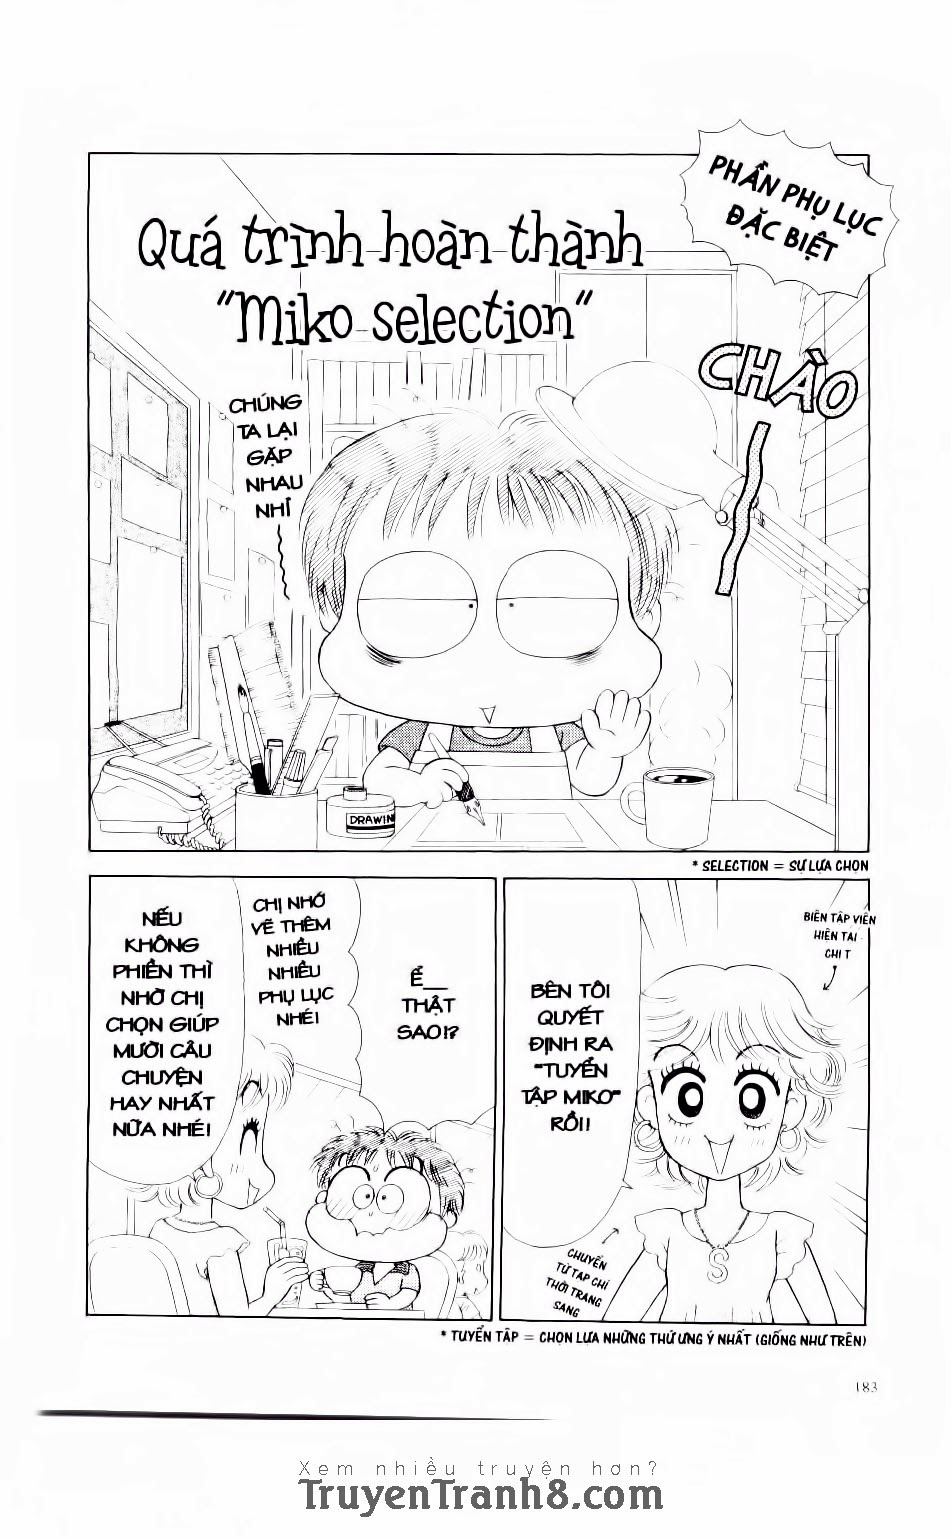 Miko Selection - Red